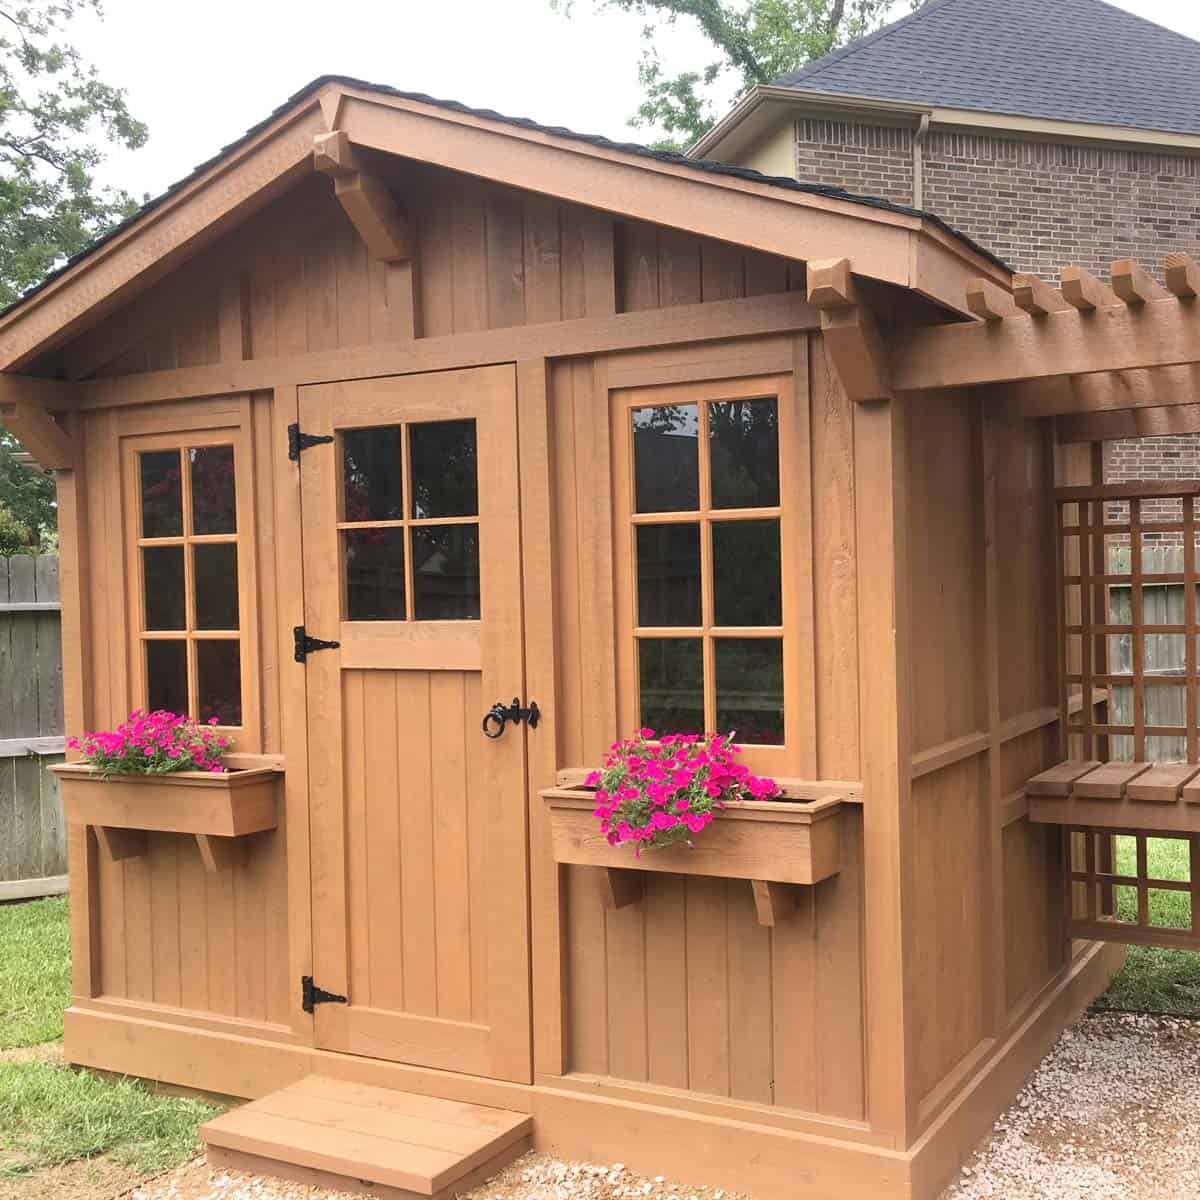 How to Build a Garden Shed? - The Housing Forum